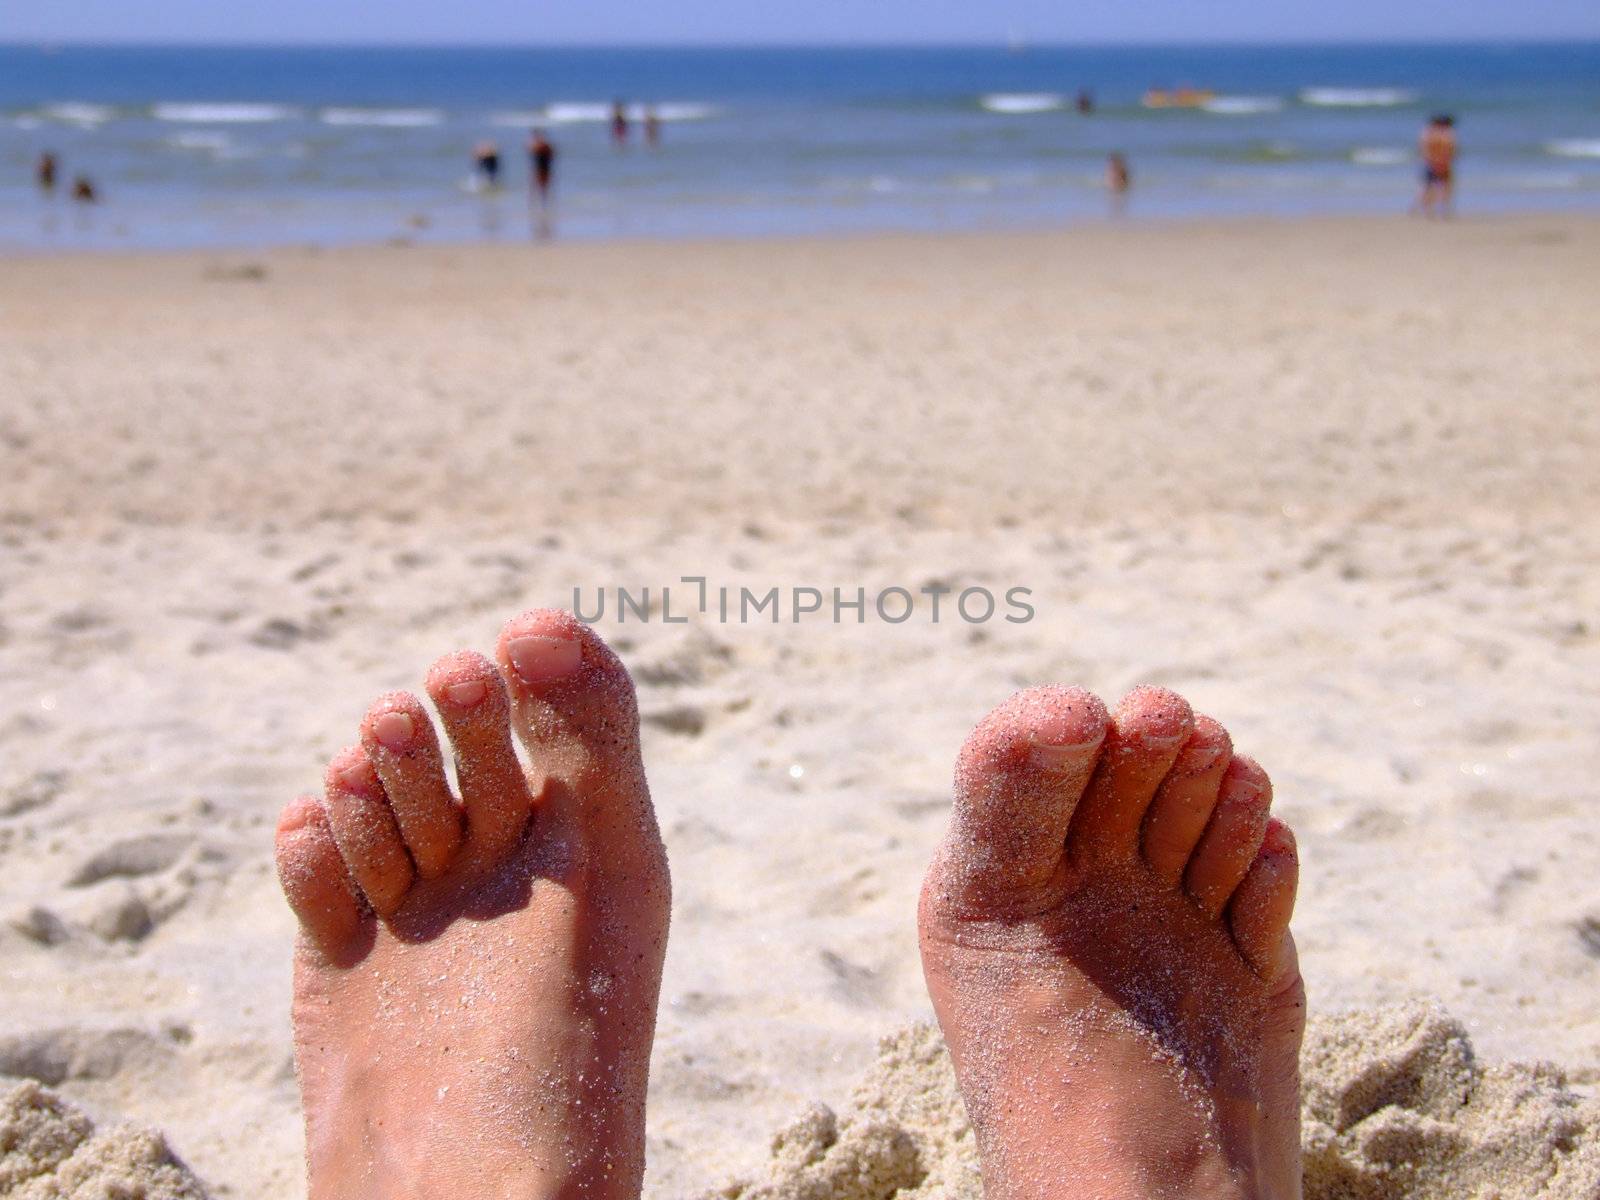 Sandy feet of someone relaxing in the beach